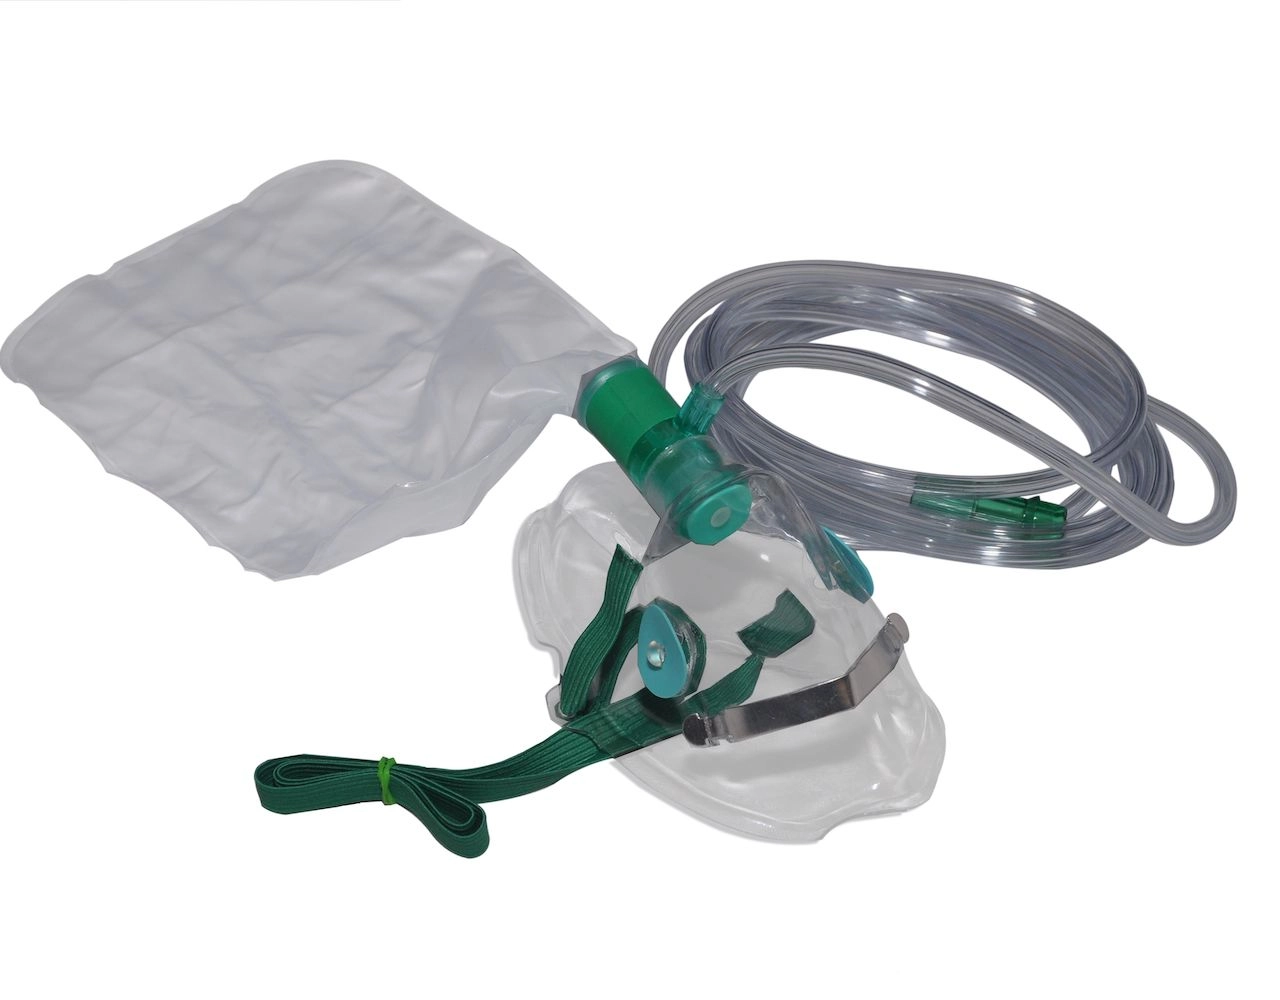 Oxygen tank with regulator and nasal cannula or non-rebreather mask